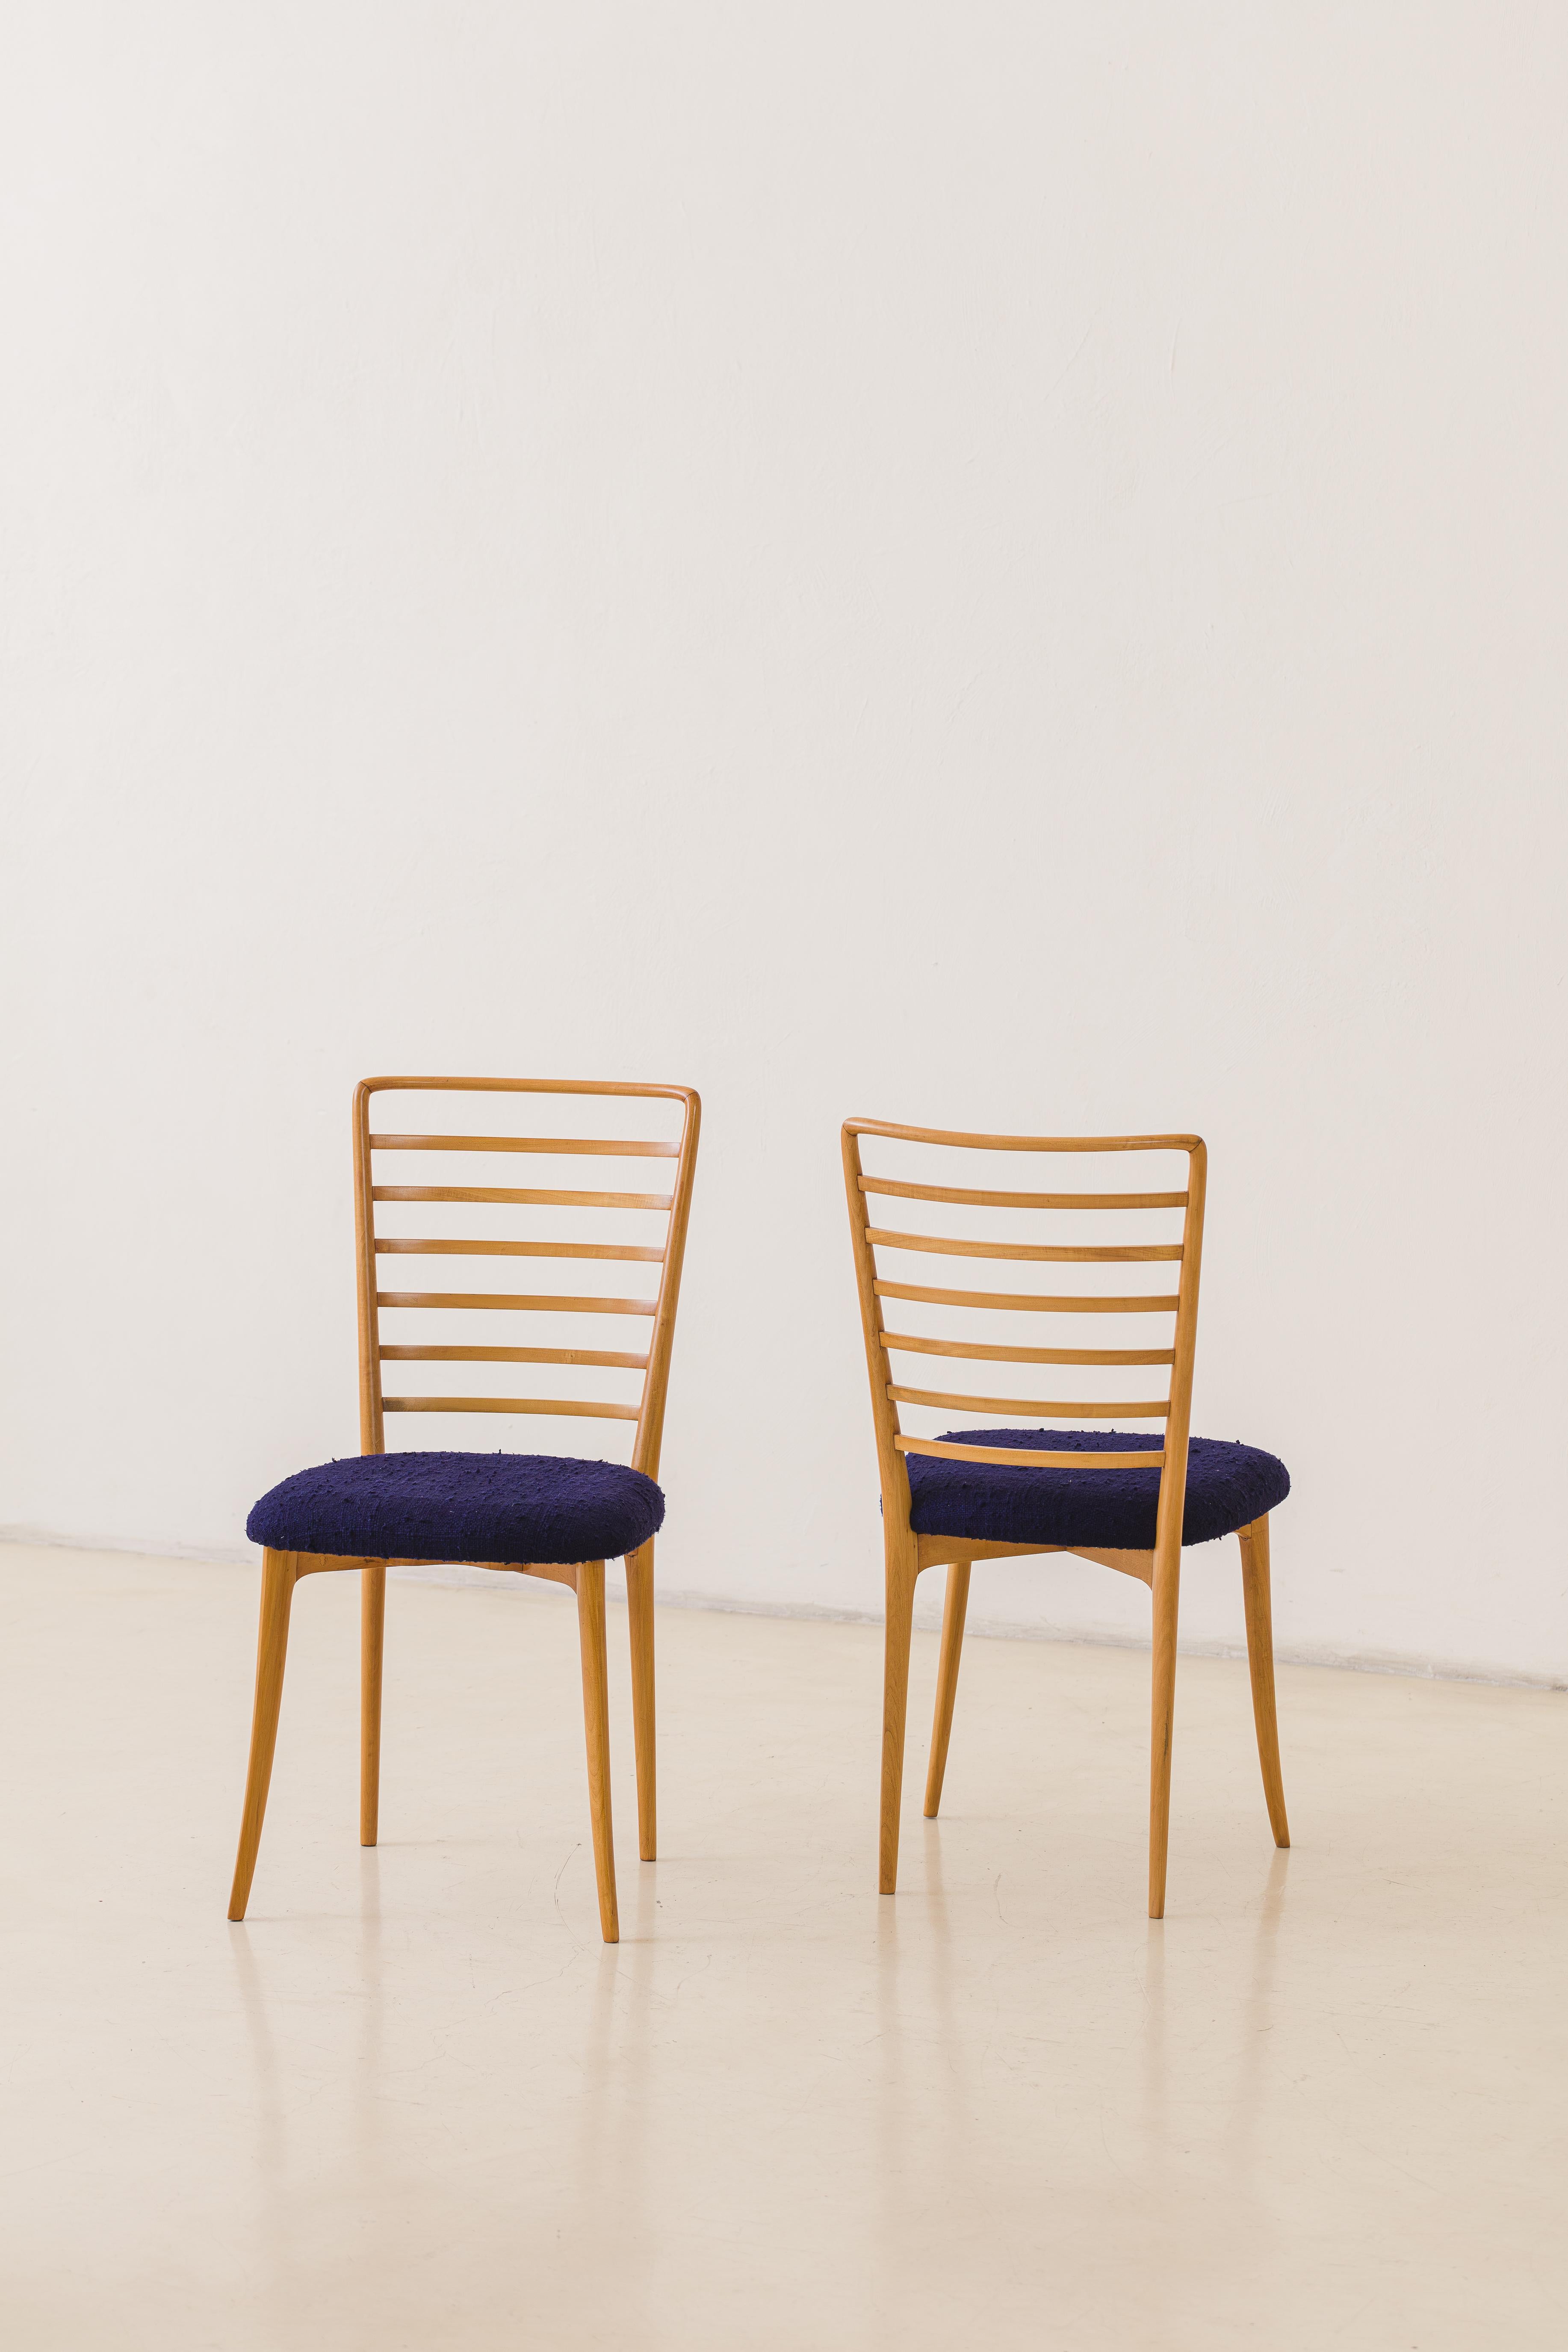 Joaquim Tenreiro Dining Chairs, Solid Wood and Fabric, MidCentury, Brazil, 1950s For Sale 1